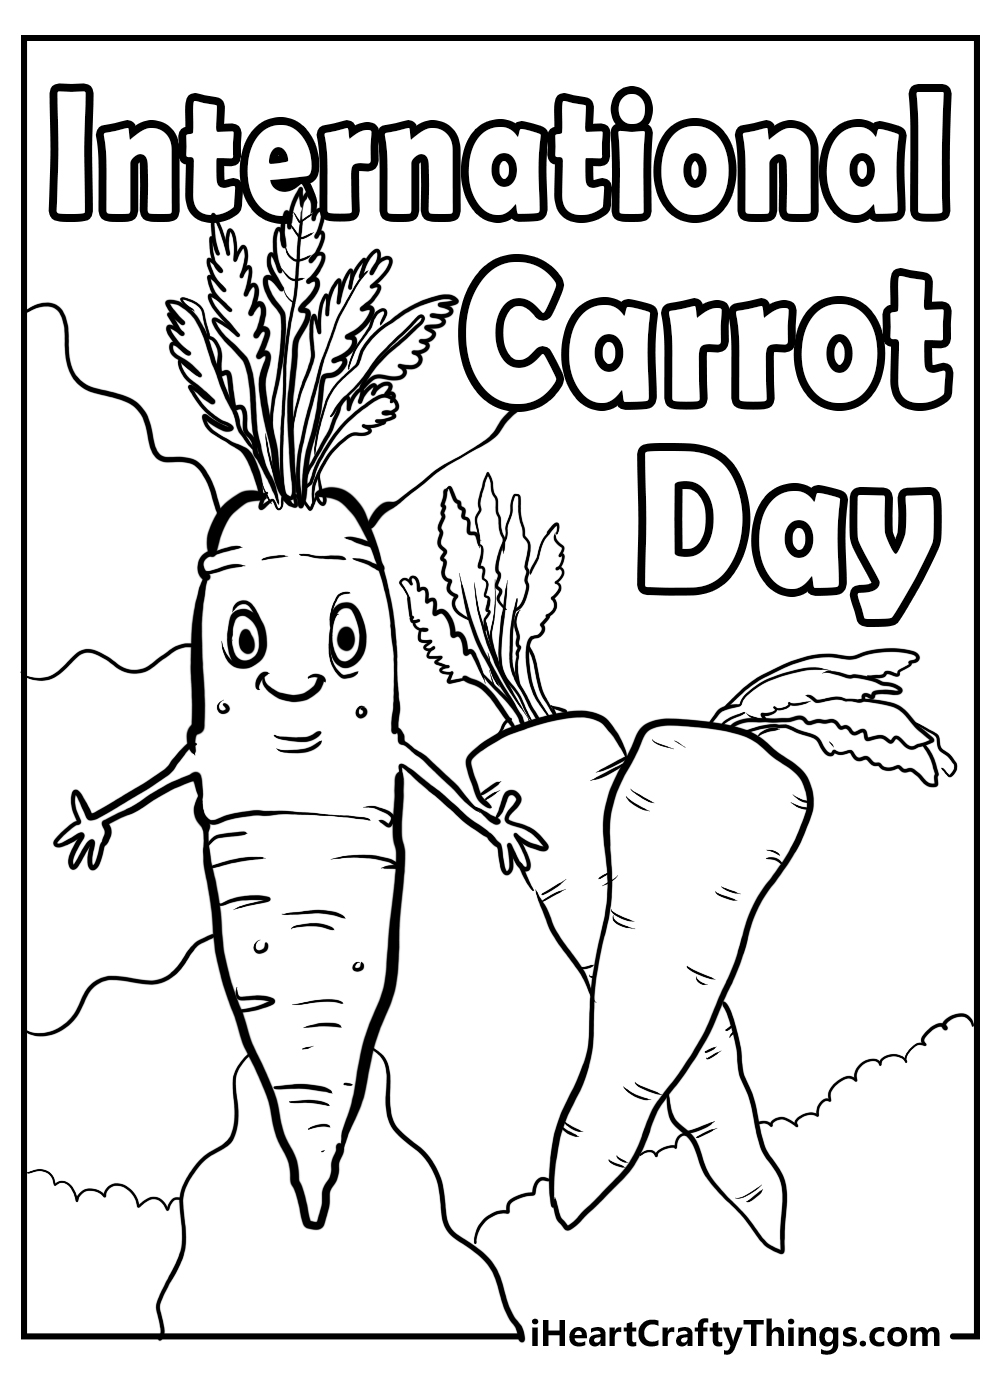 international carrot day coloring pages